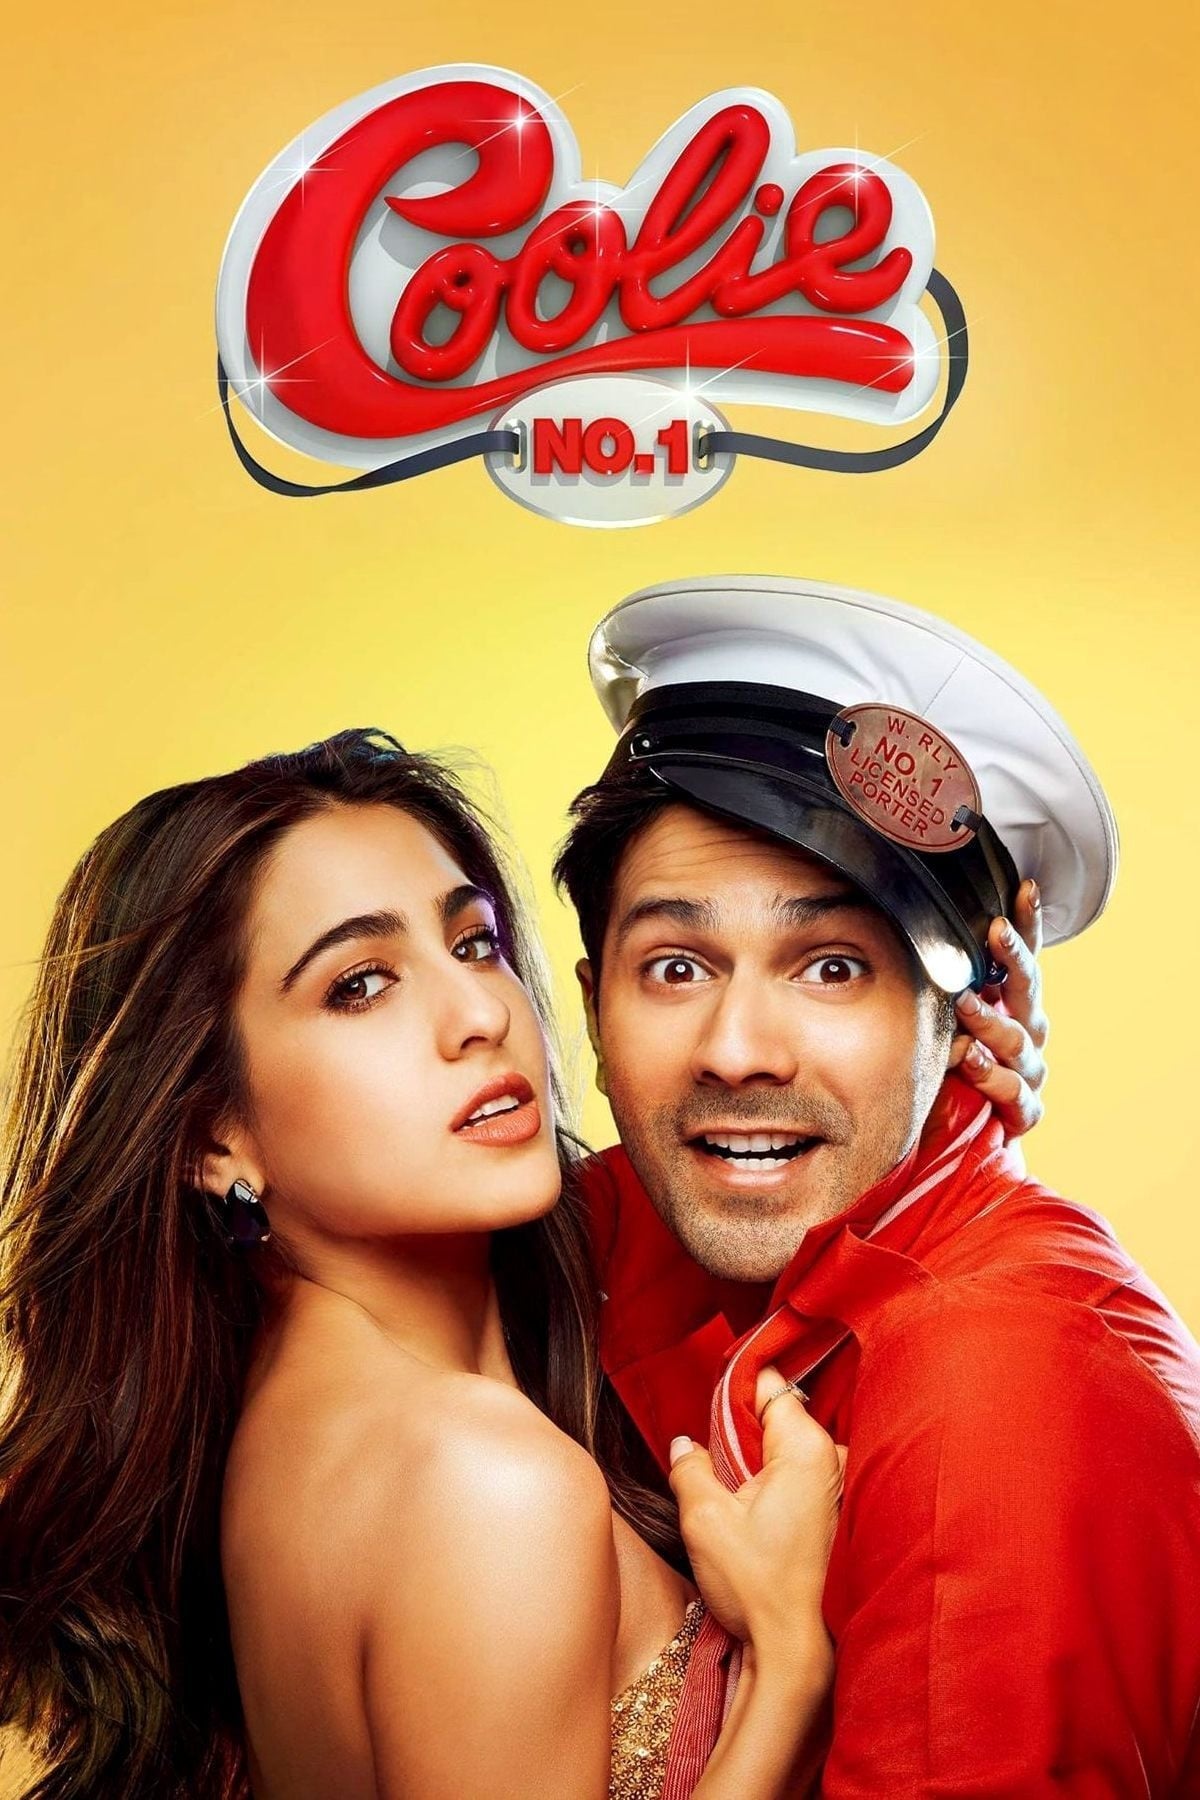 Coolie no 1 2020 full movie download filmywap